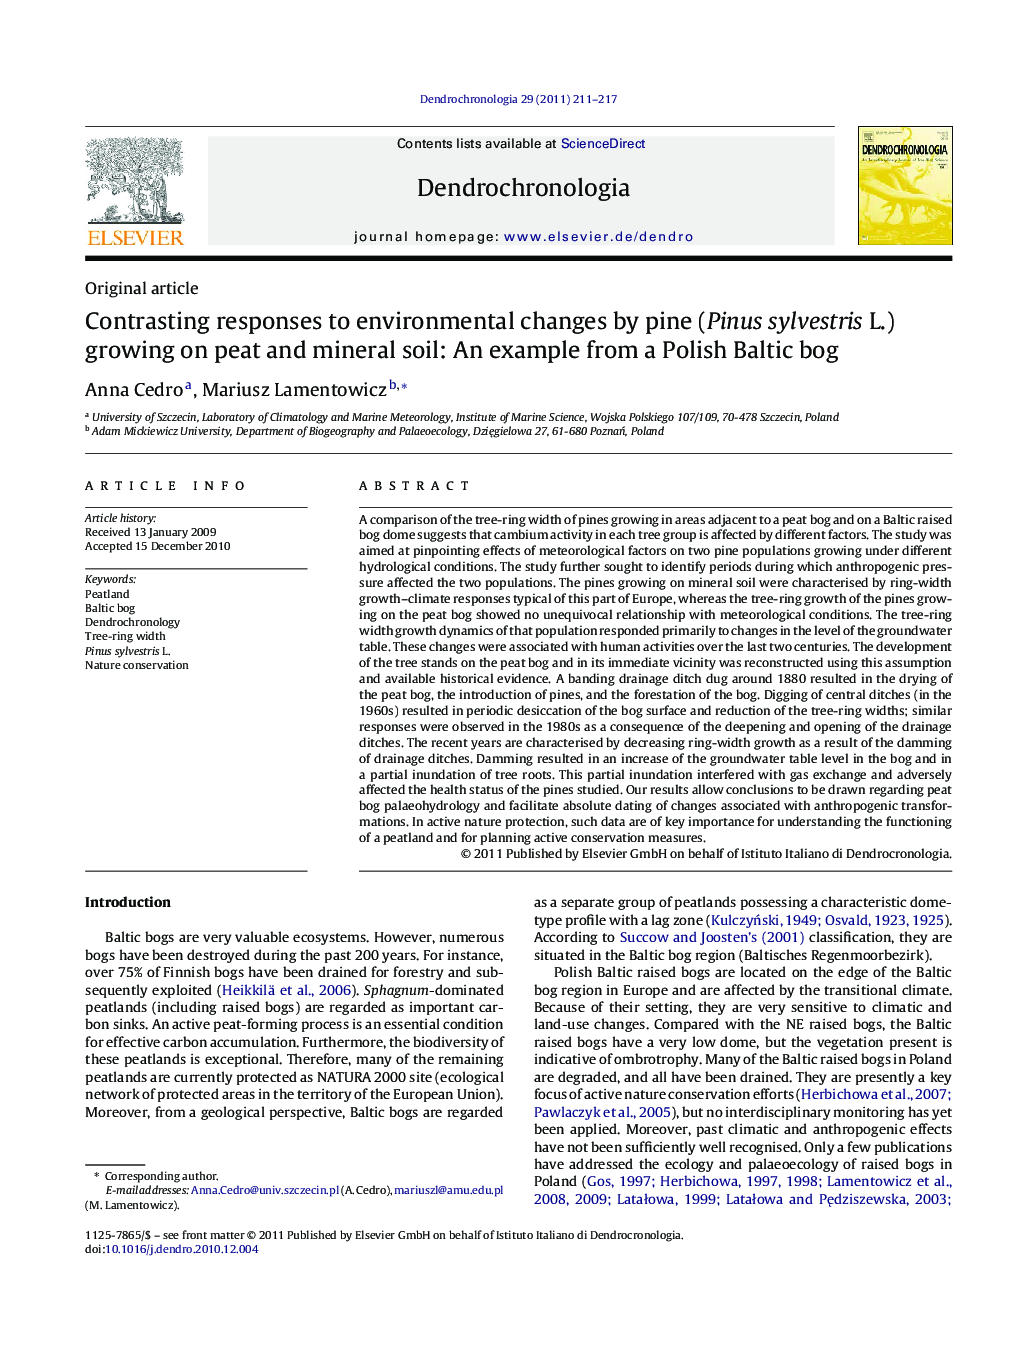 Contrasting responses to environmental changes by pine (Pinus sylvestris L.) growing on peat and mineral soil: An example from a Polish Baltic bog